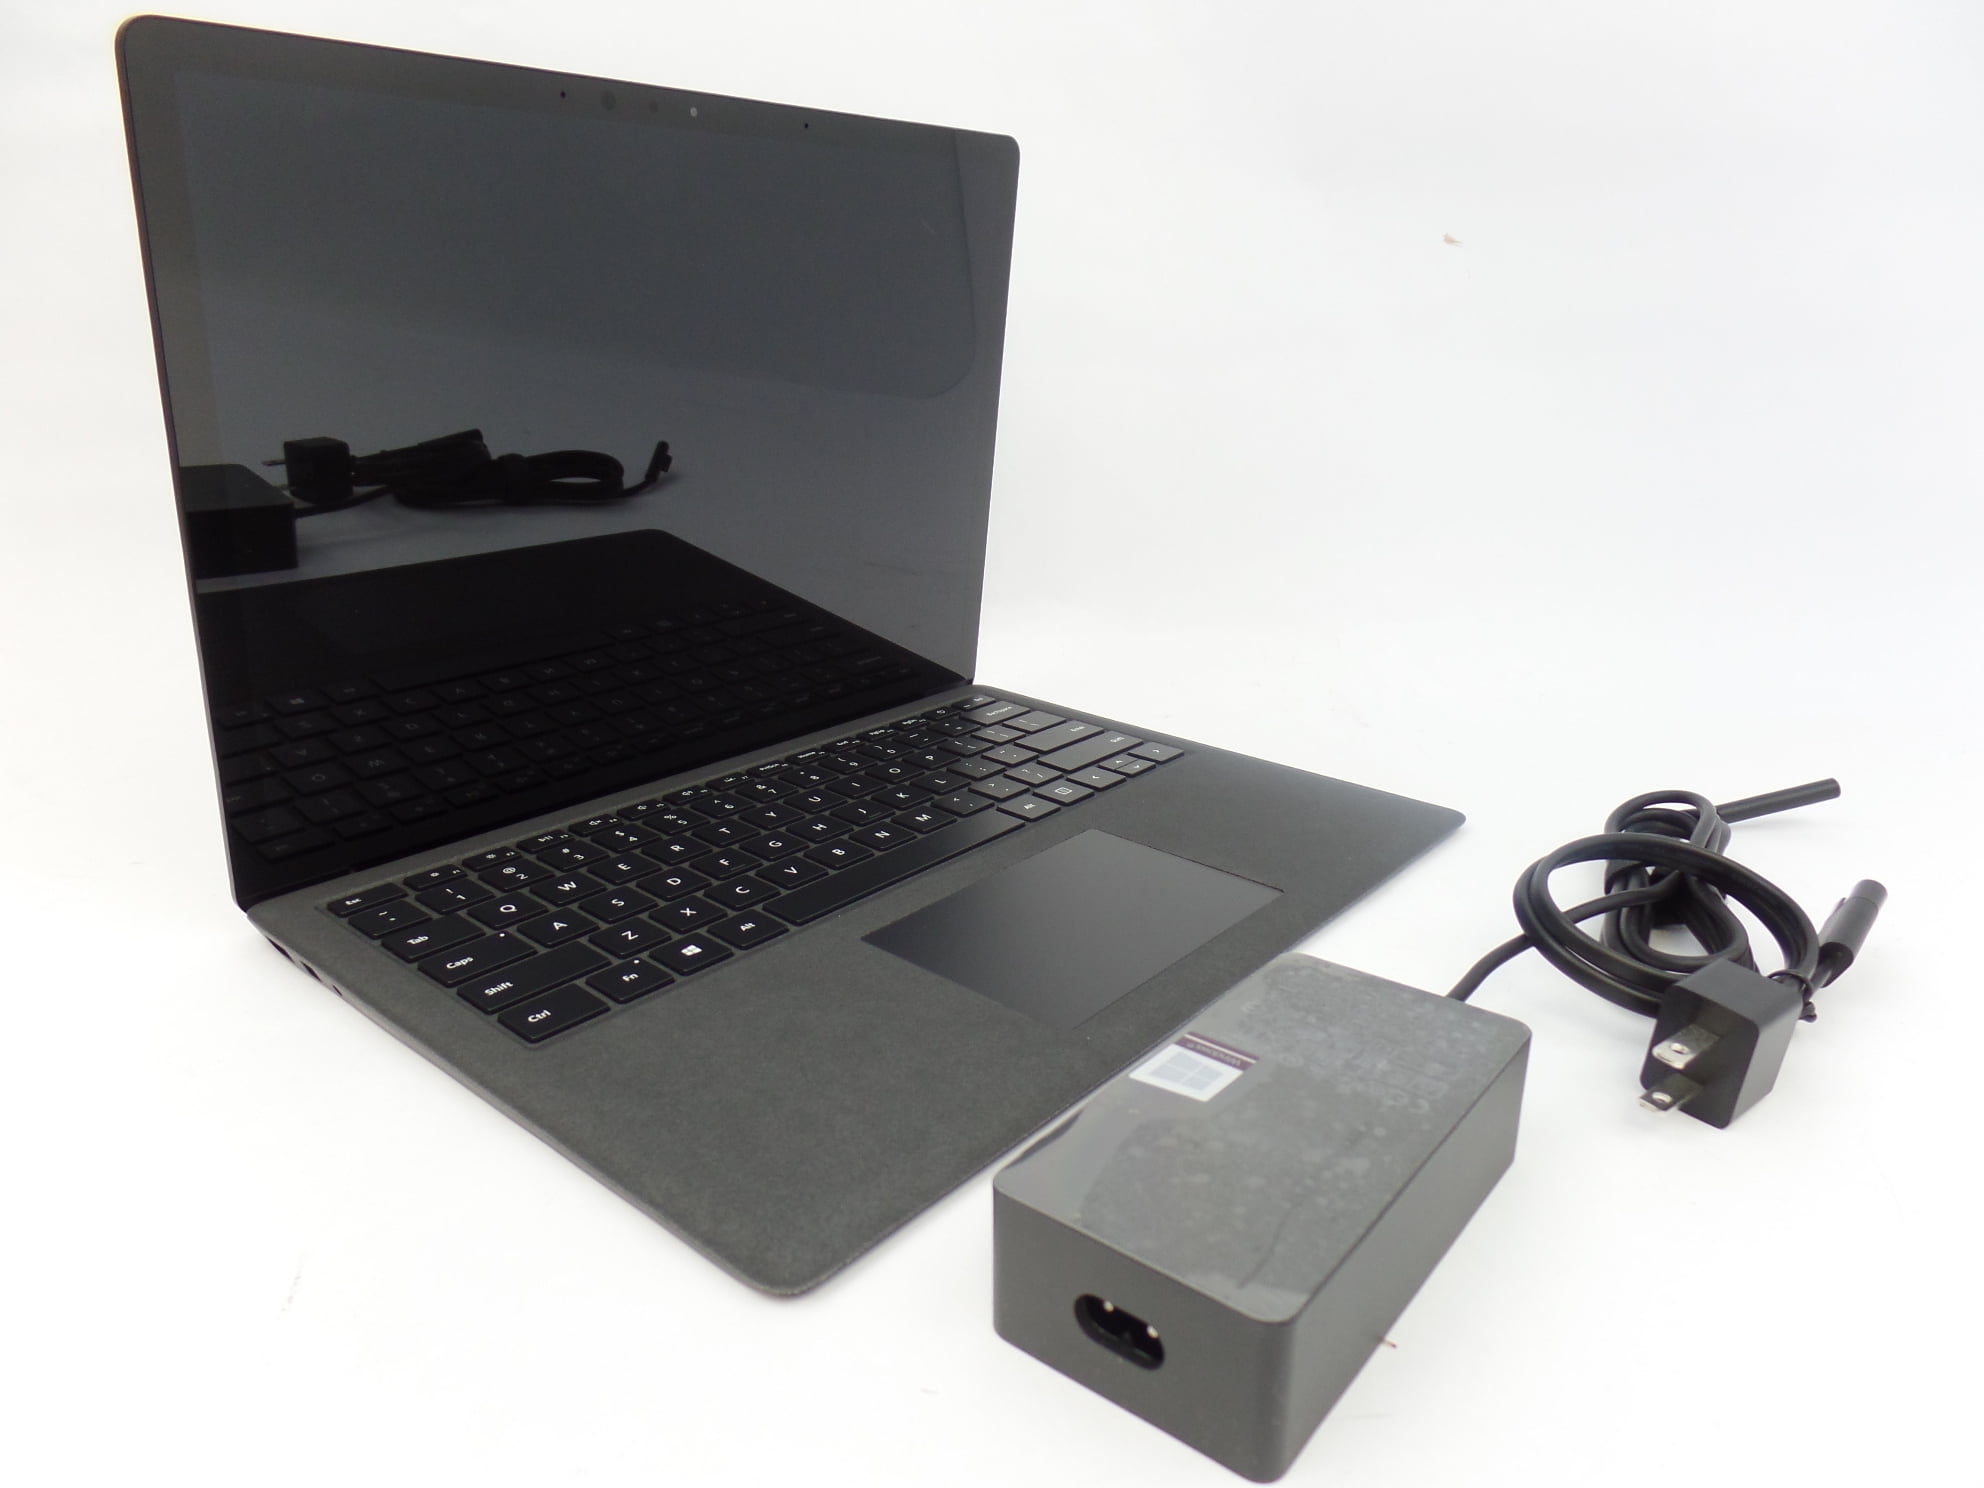 Used (good working condition) Microsoft Surface Laptop 1769 13.5" Touch